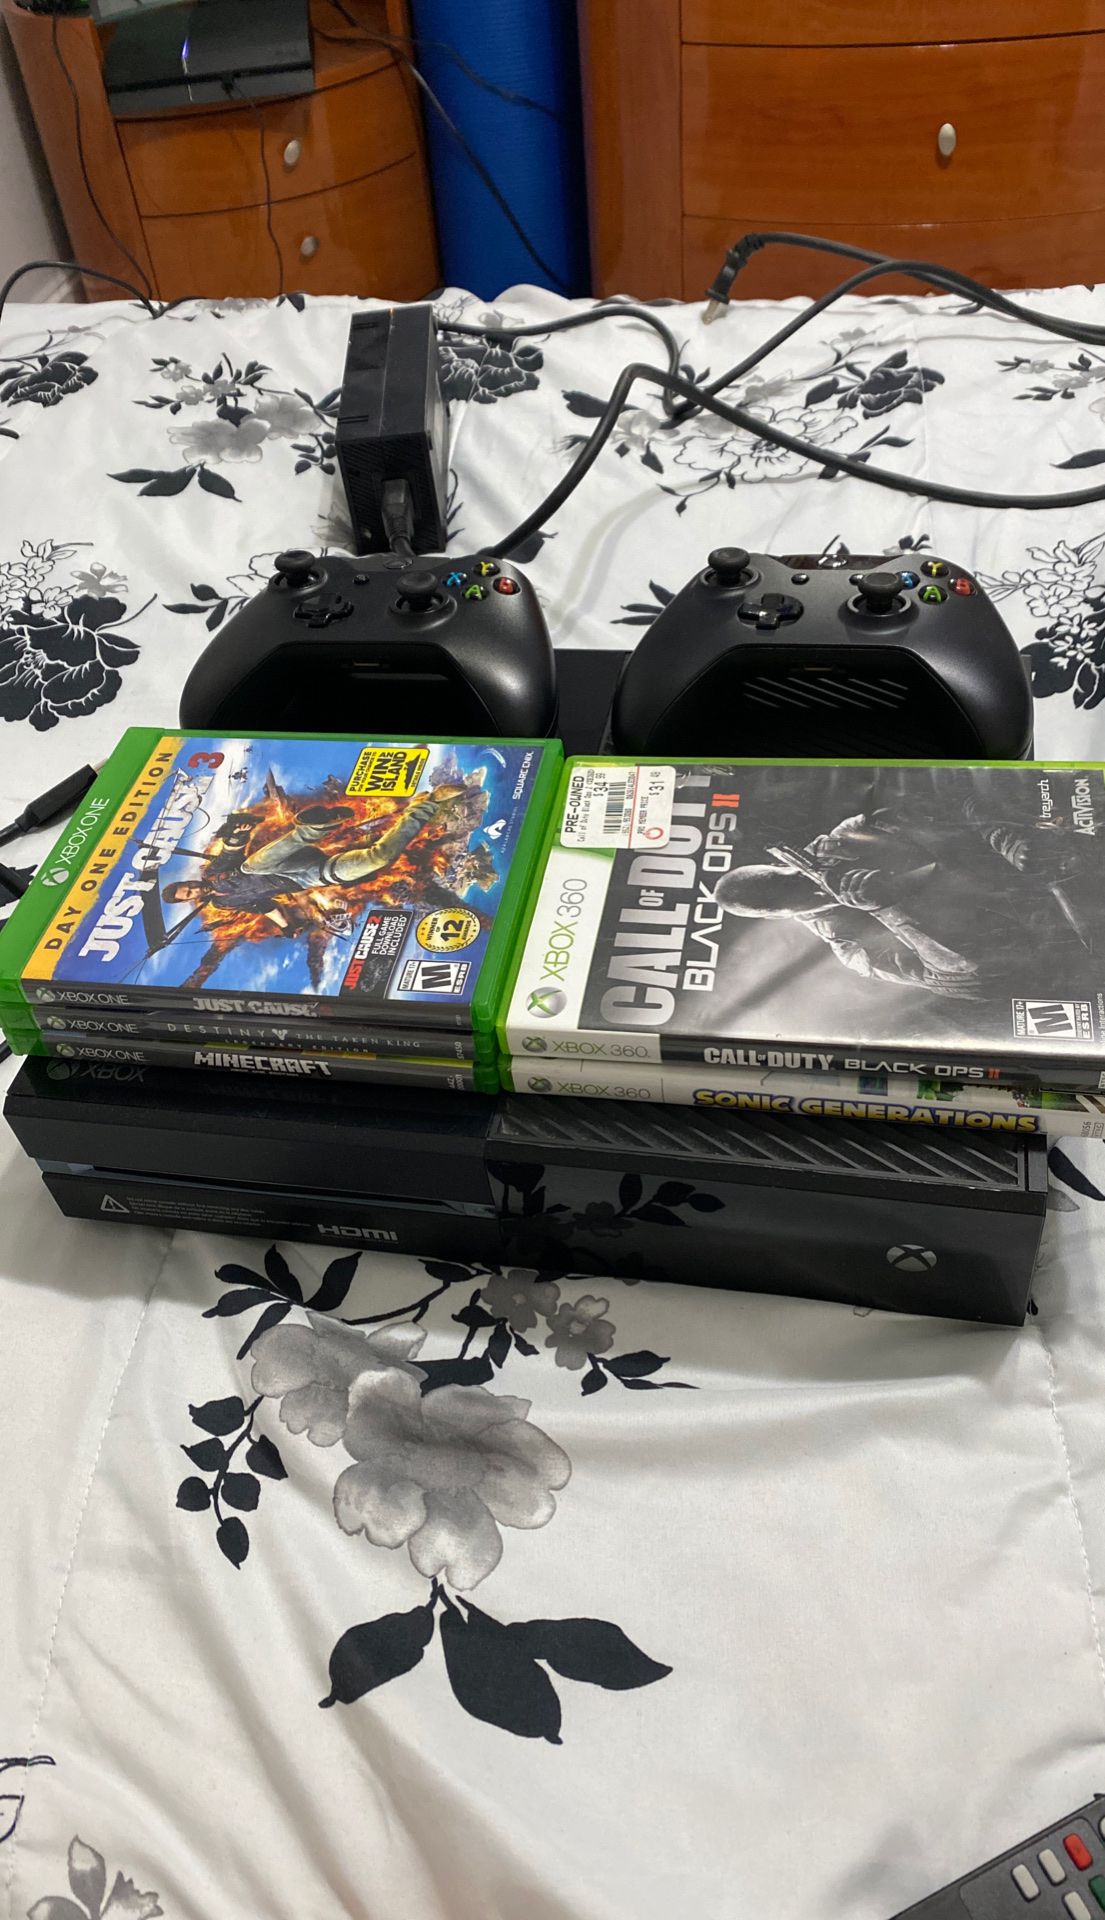 3 Xbox 1 games 2 Xbox 360 games, 3 controllers with hdmi cable included